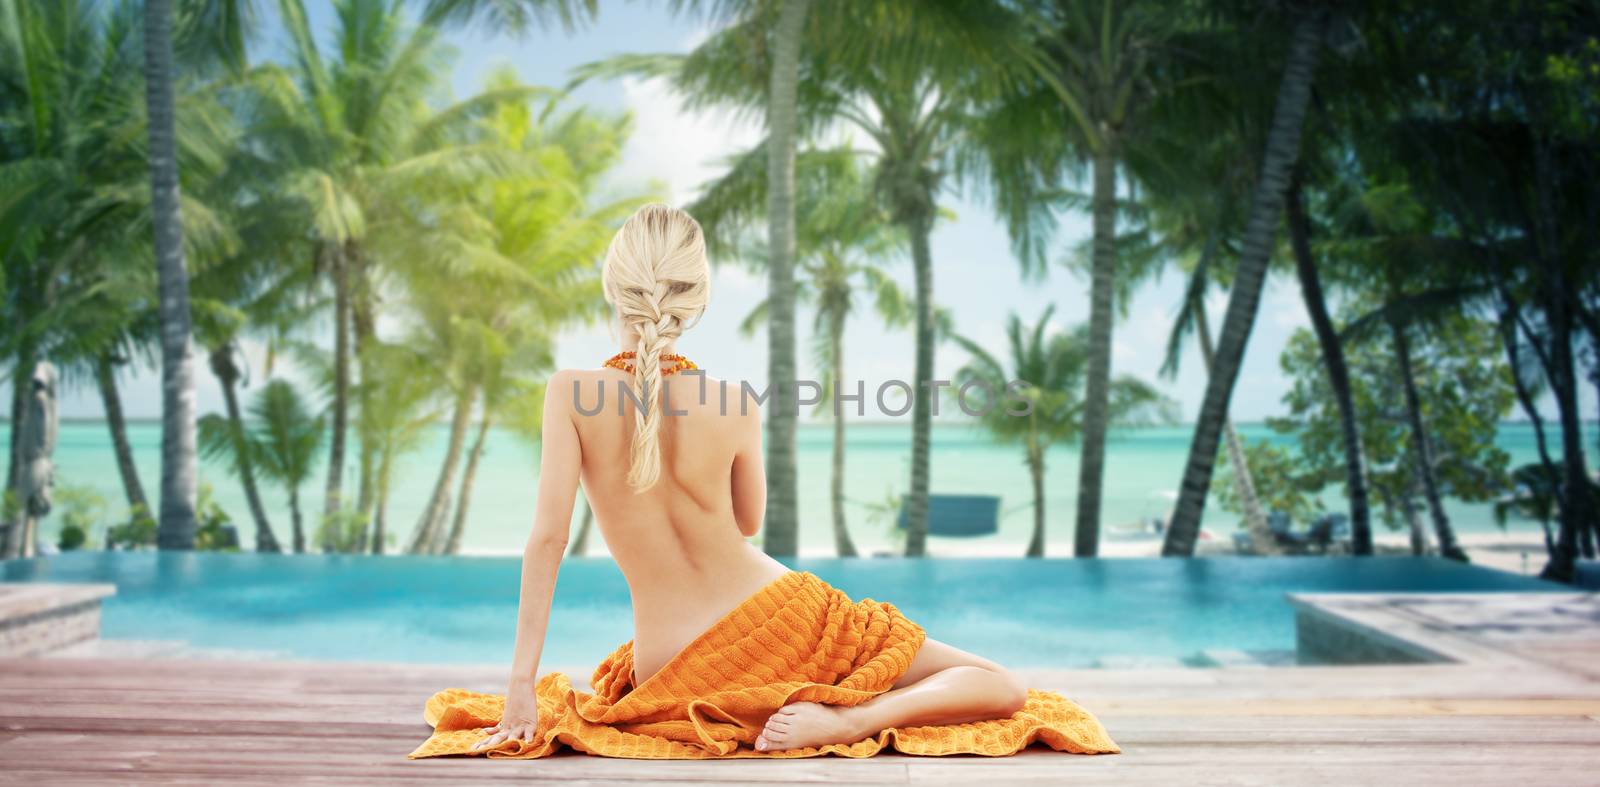 people, travel, tourism, summer and people concept - woman with orange towel from back over tropical beach with swimming pool background